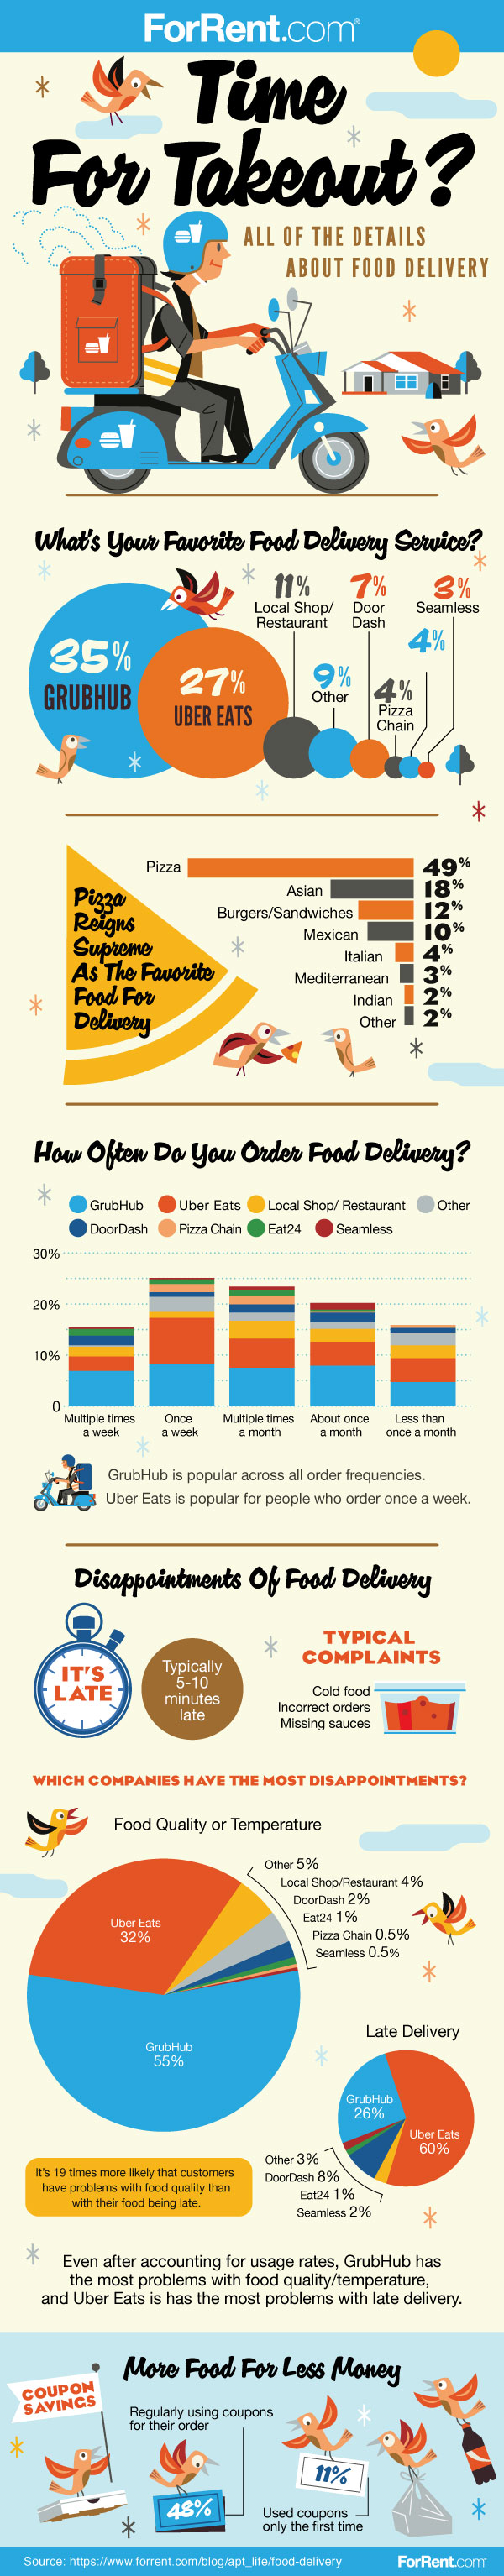 Interesting Food Delivery Stats [Infographic]